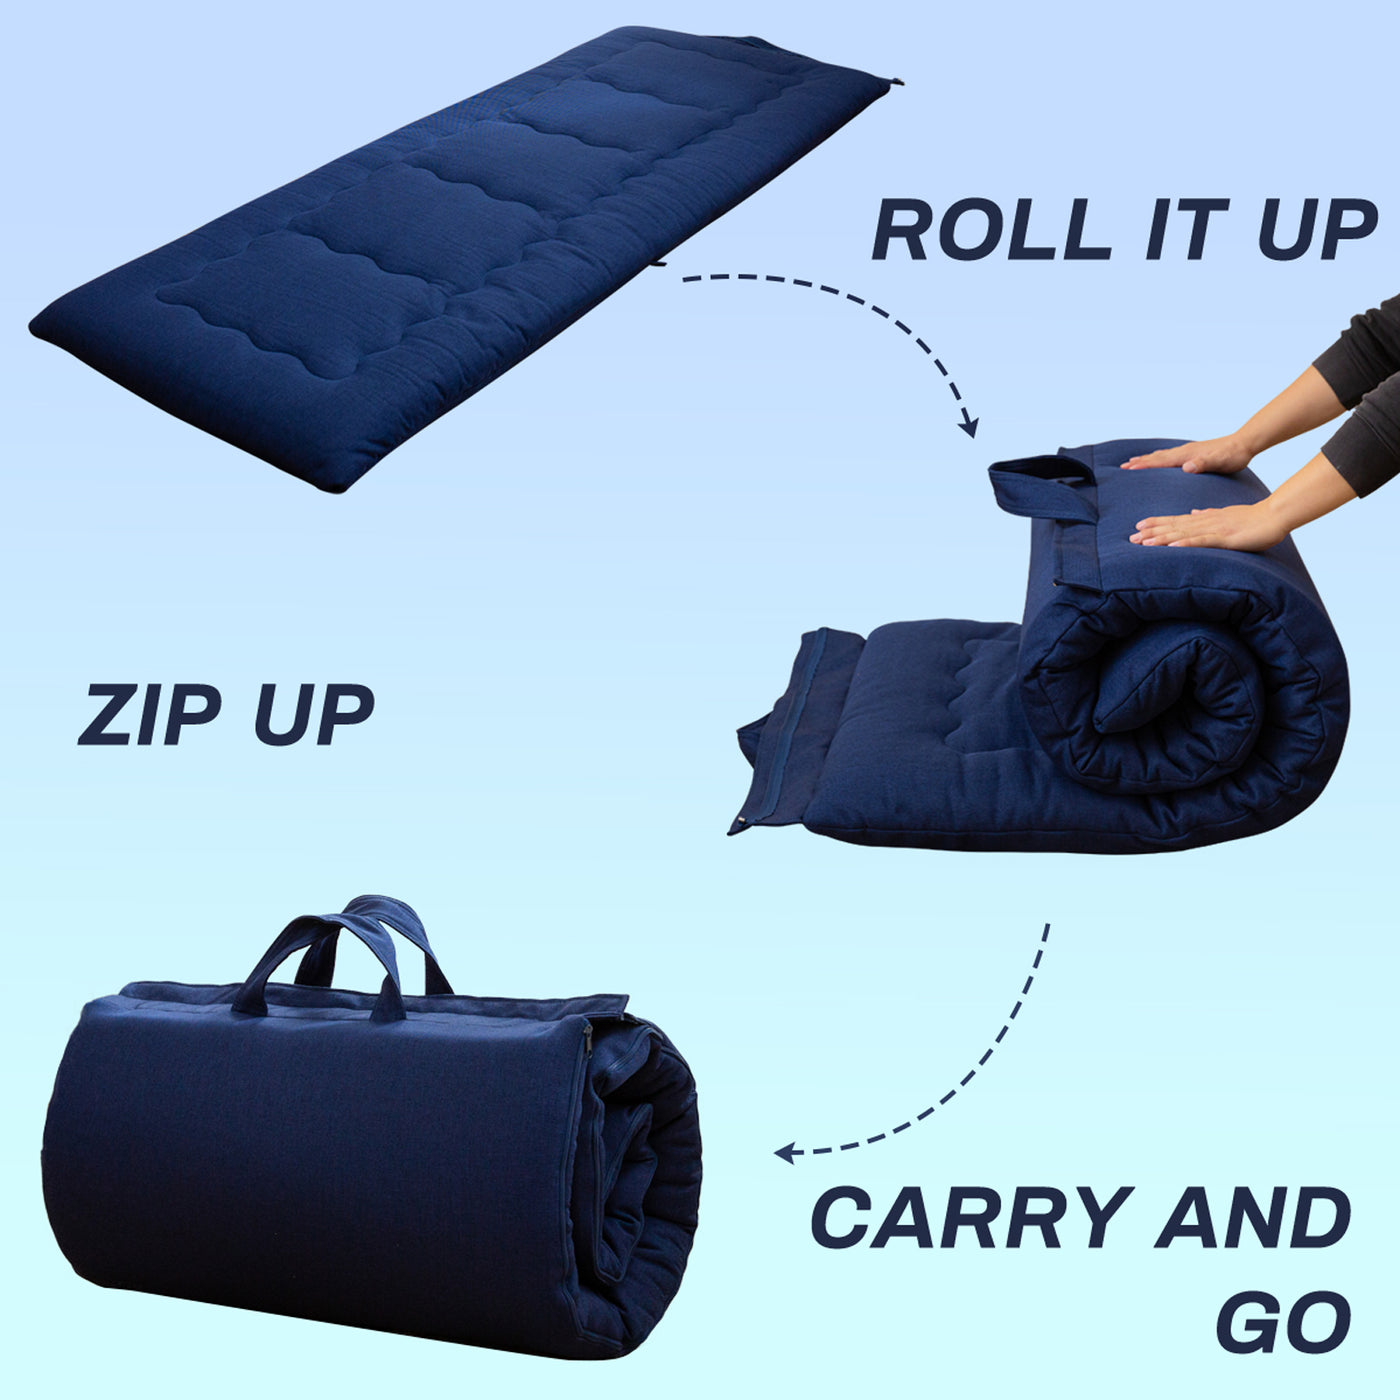 MAXYOYO Roll Up Camping Mattress, Carry Handle Foldable Futon Mattress Outdoor Indoor Roll Out Pad, Navy